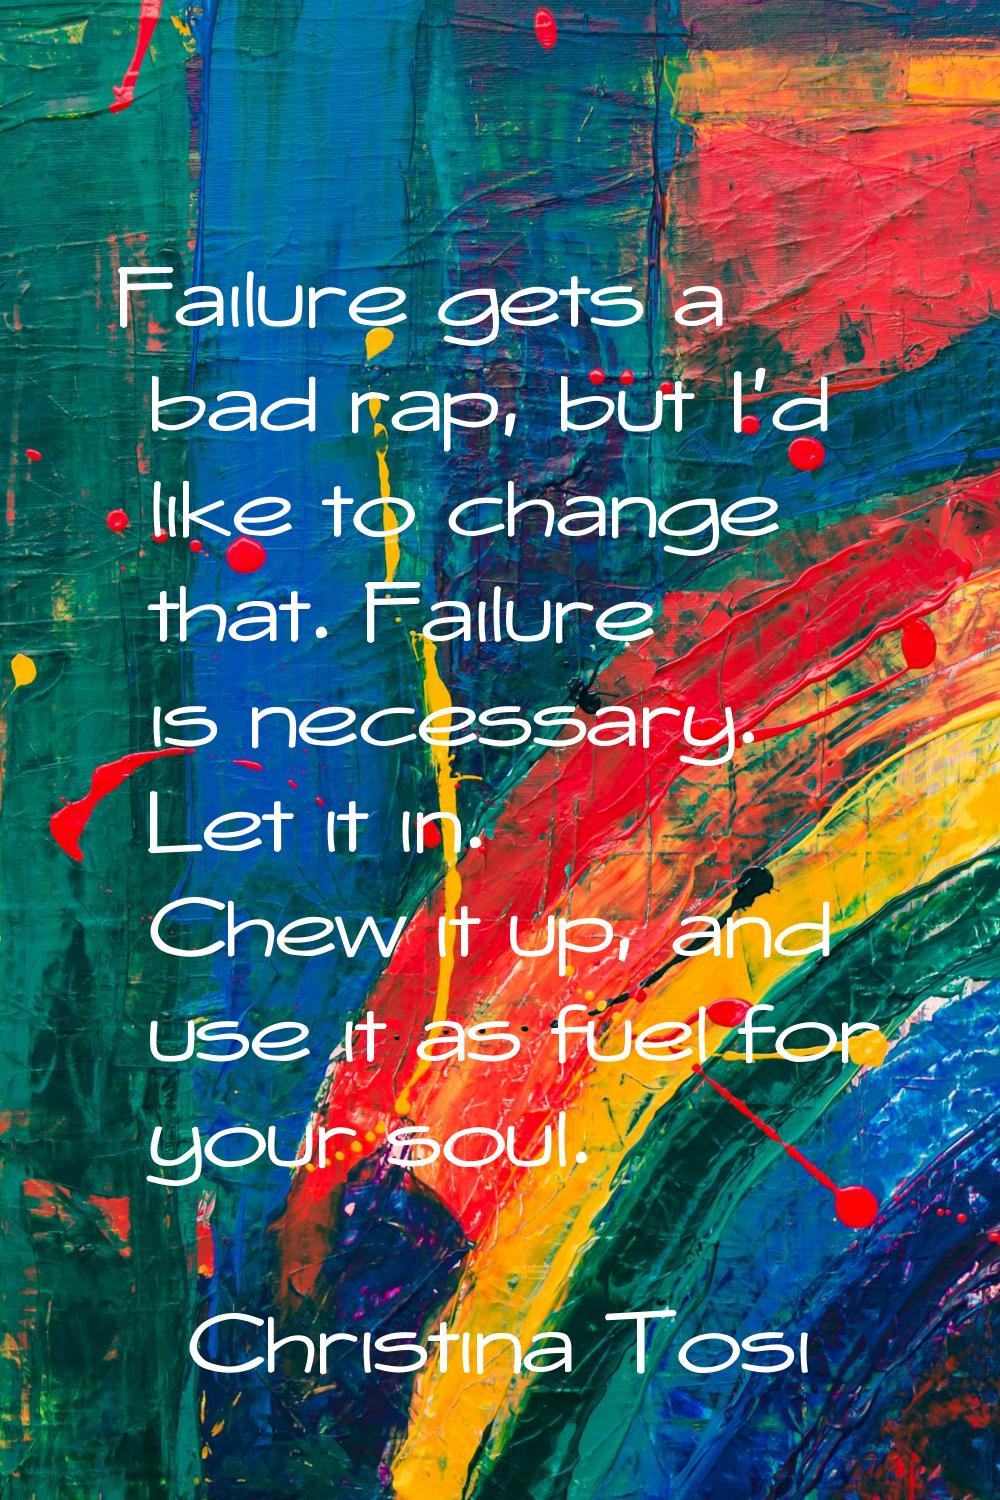 Failure gets a bad rap, but I'd like to change that. Failure is necessary. Let it in. Chew it up, a